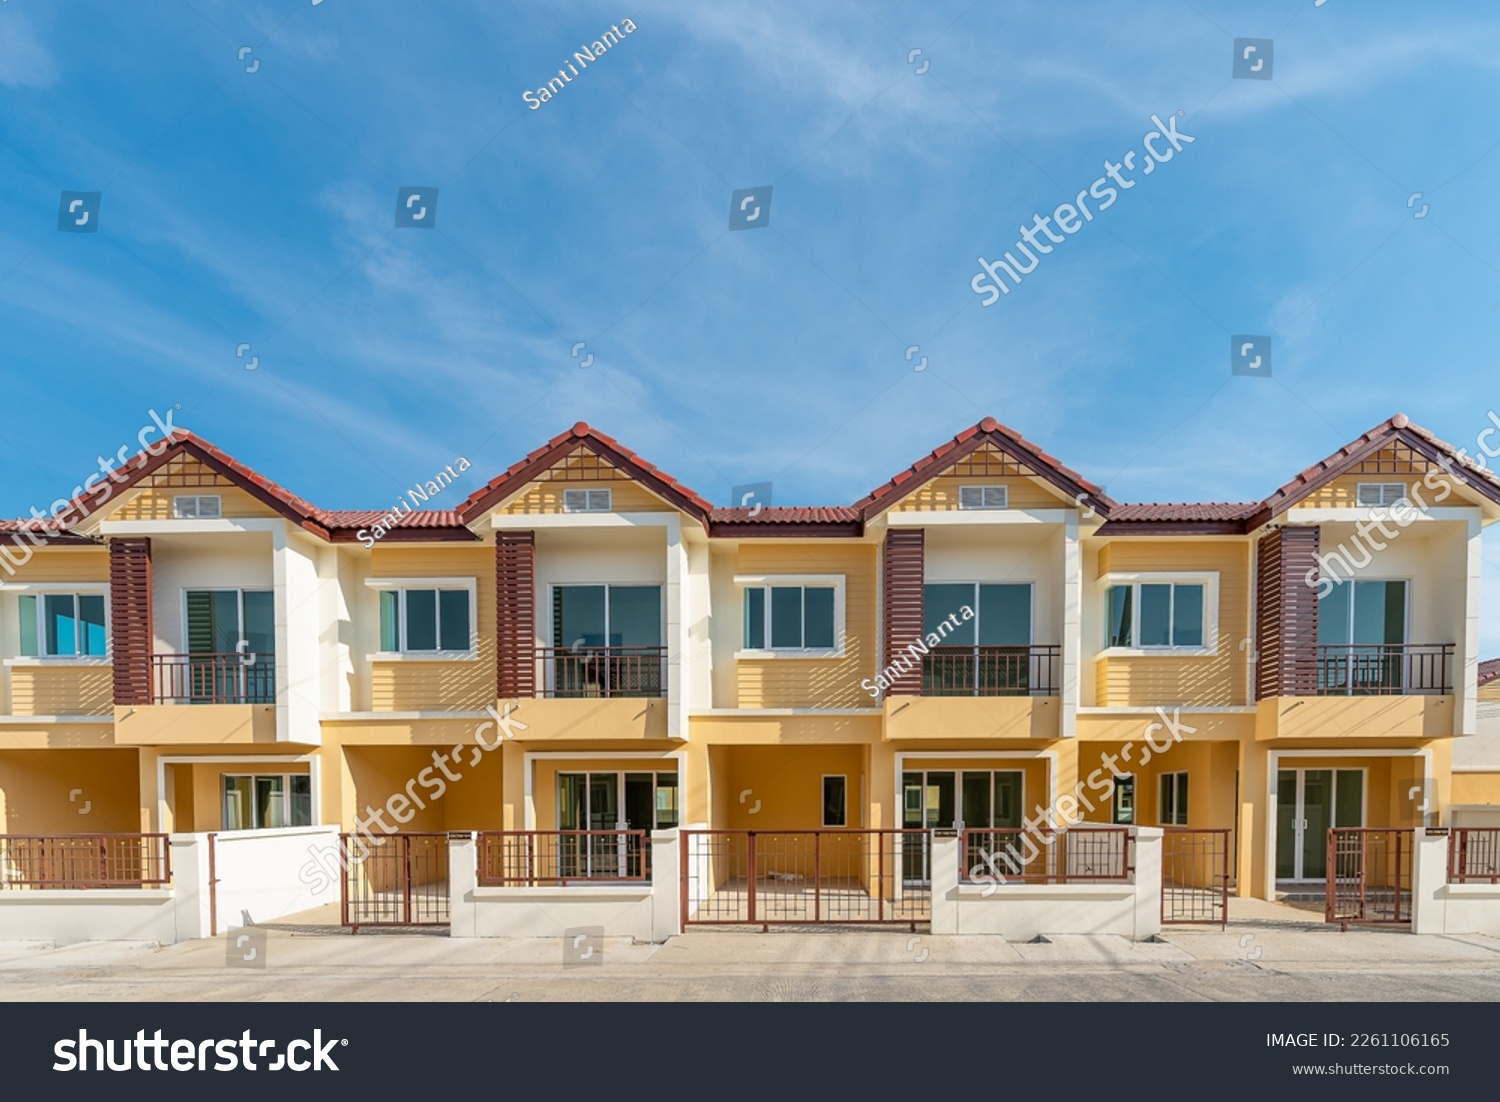 The row of just finished new yellow townhouses, Front View of New Residential house, the architectural design of the exterior with blue sky and apace,The concept for Sale, Rent,Housing,and Real Estate #2261106165